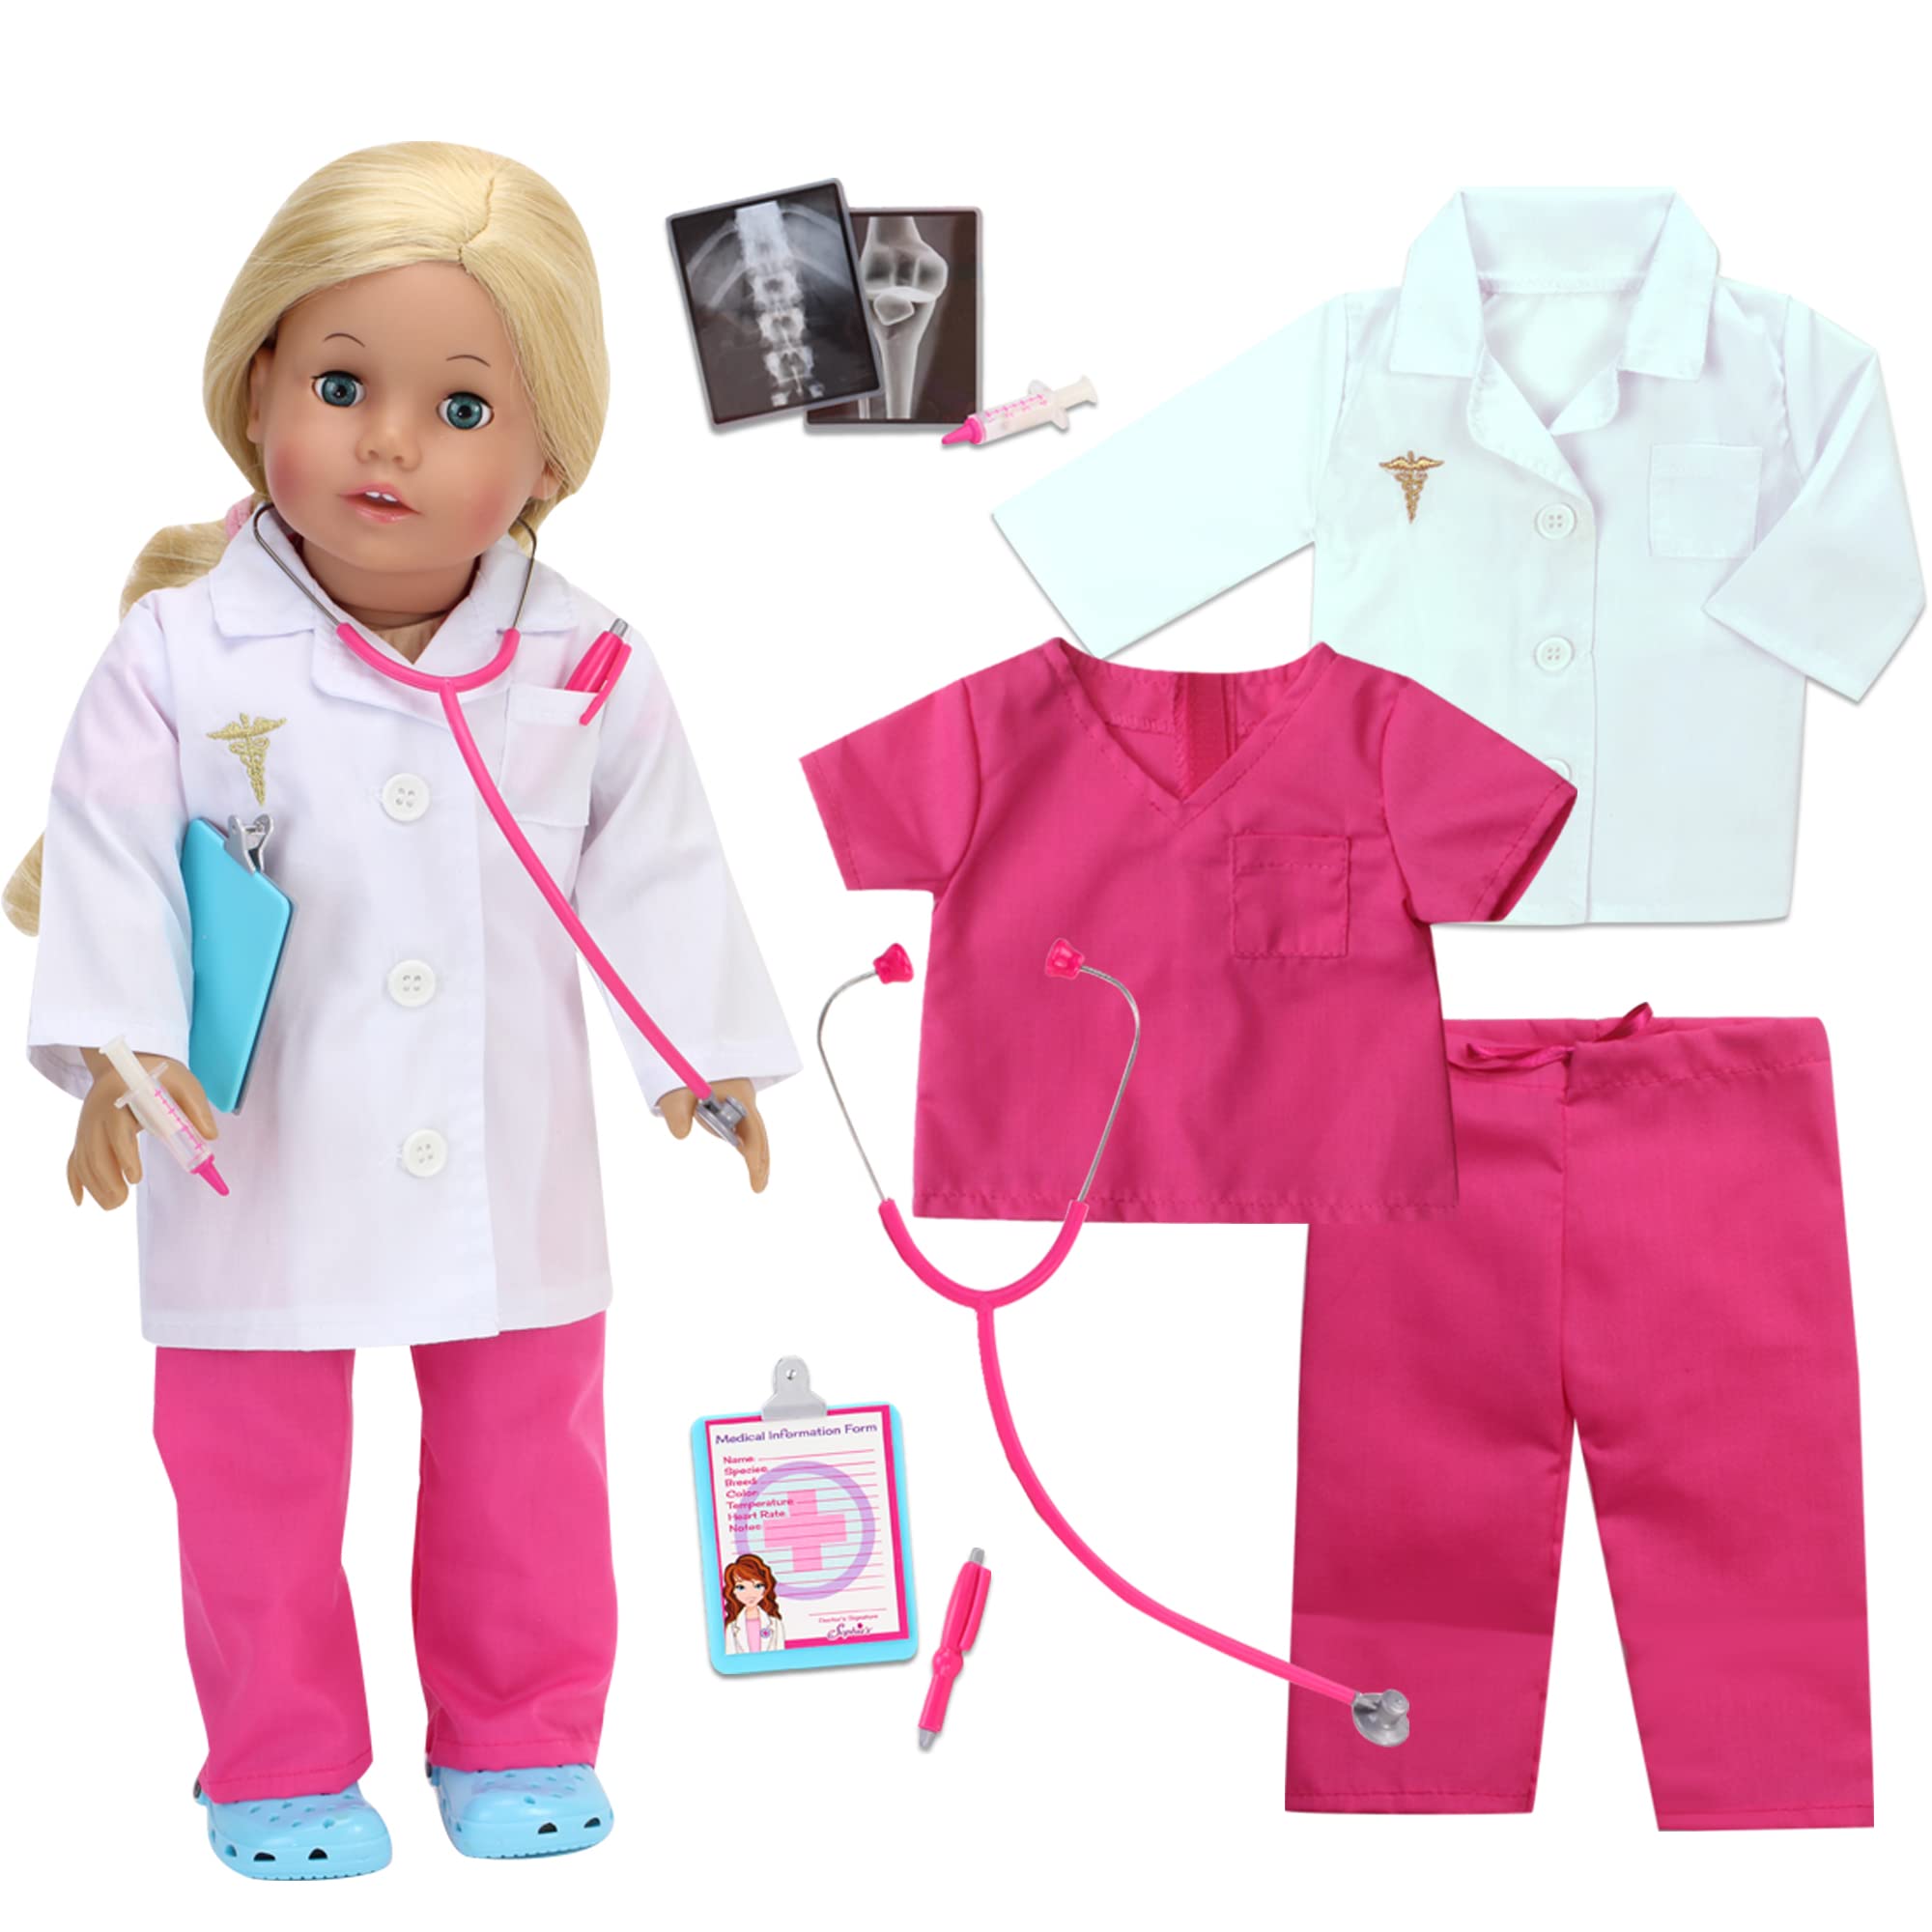 Sophia's Doll Doctor Outfit and Medical Accessories 10 Piece Set with Lab Coat, Scrubs X-Rays and More for 18" Dolls, Hot Pink